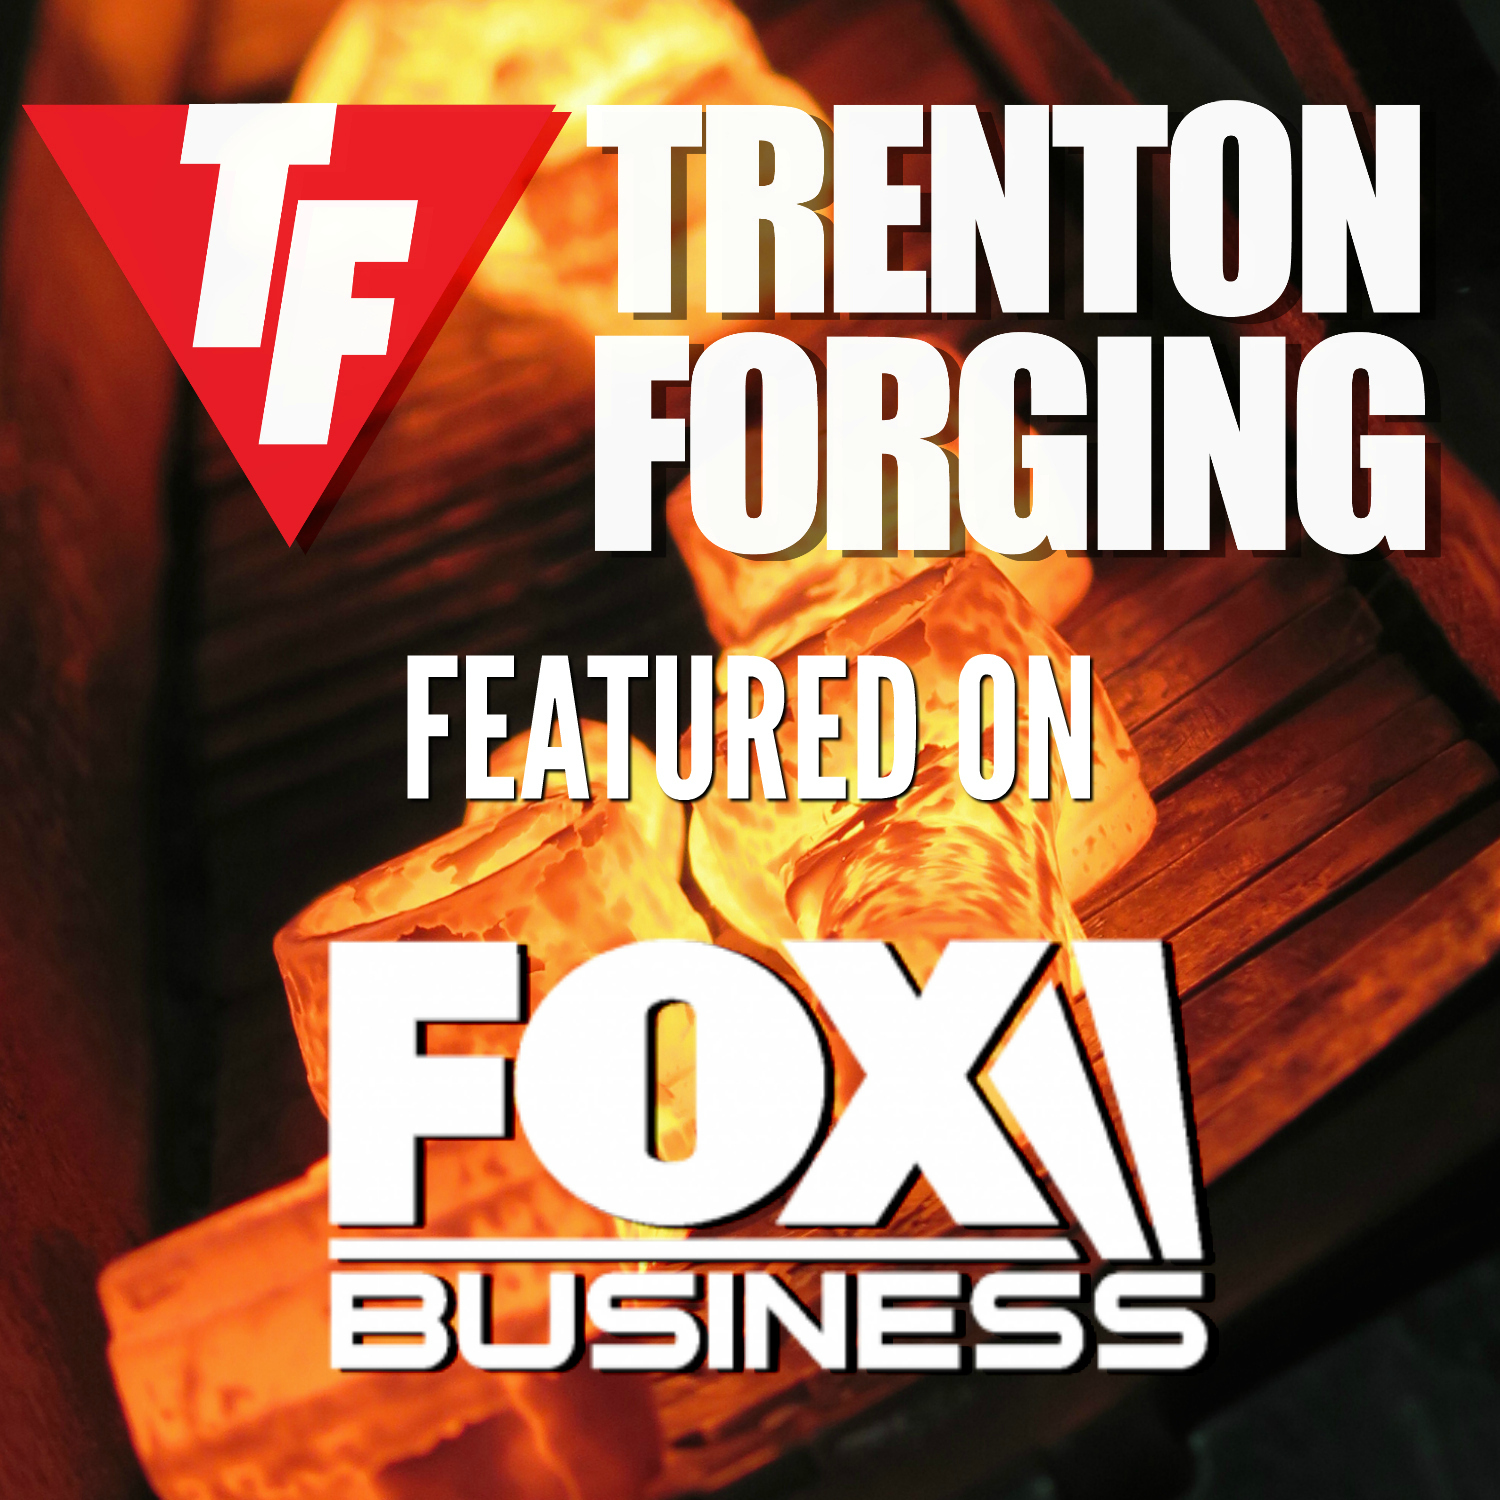 Trenton Forging Company featured on Fox Business